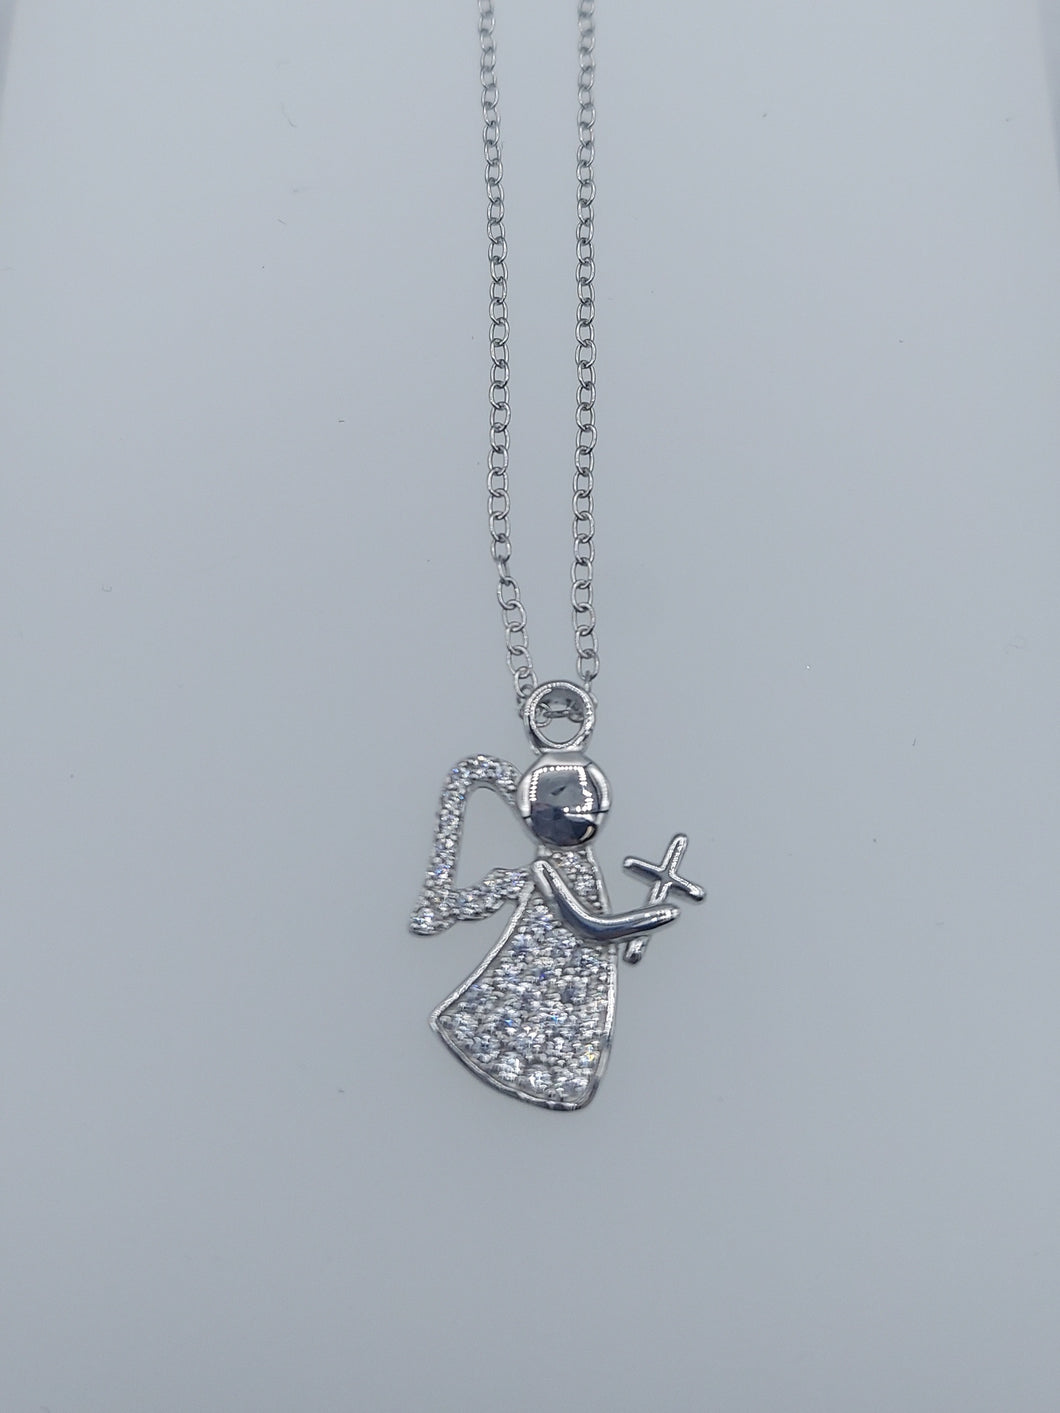 Angel Necklace - Sterling Silver